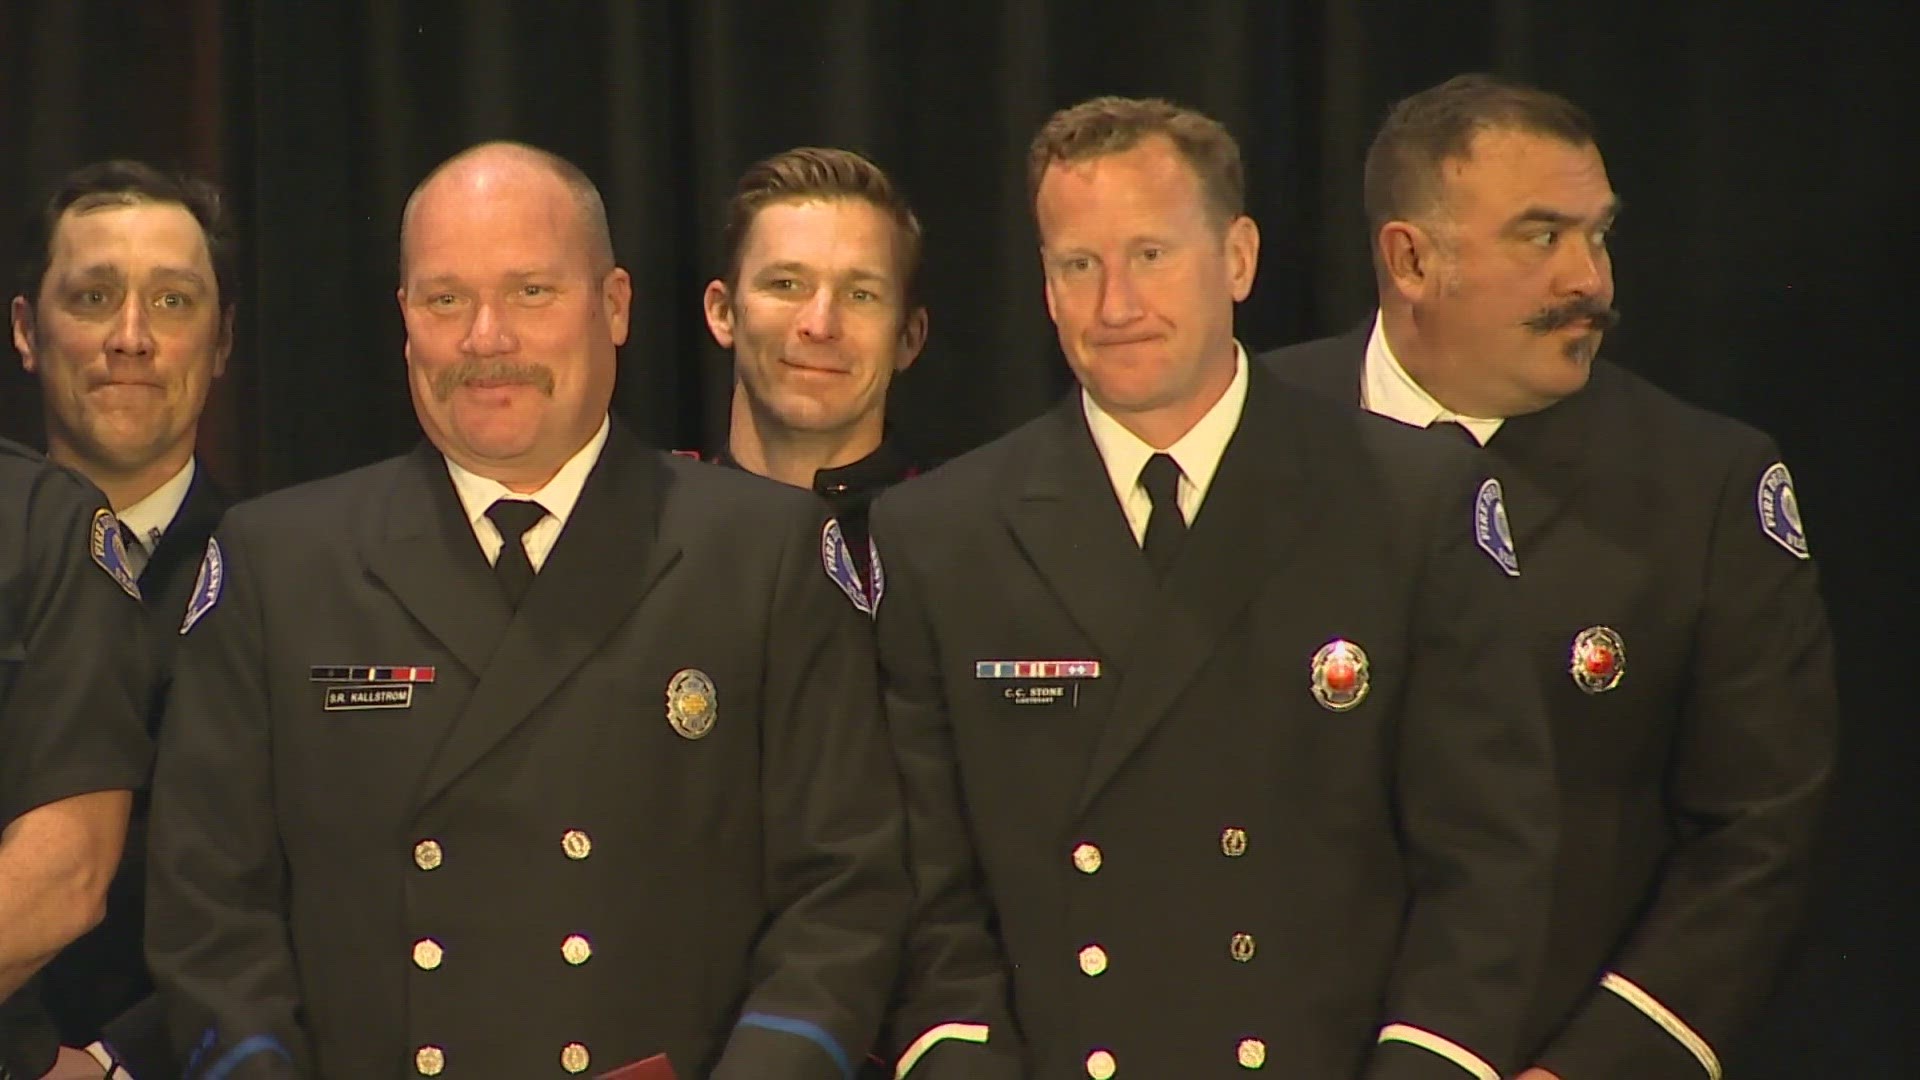 Dozens of firefighters, first responders and civilians were honored at the annual awards ceremony on April 18.